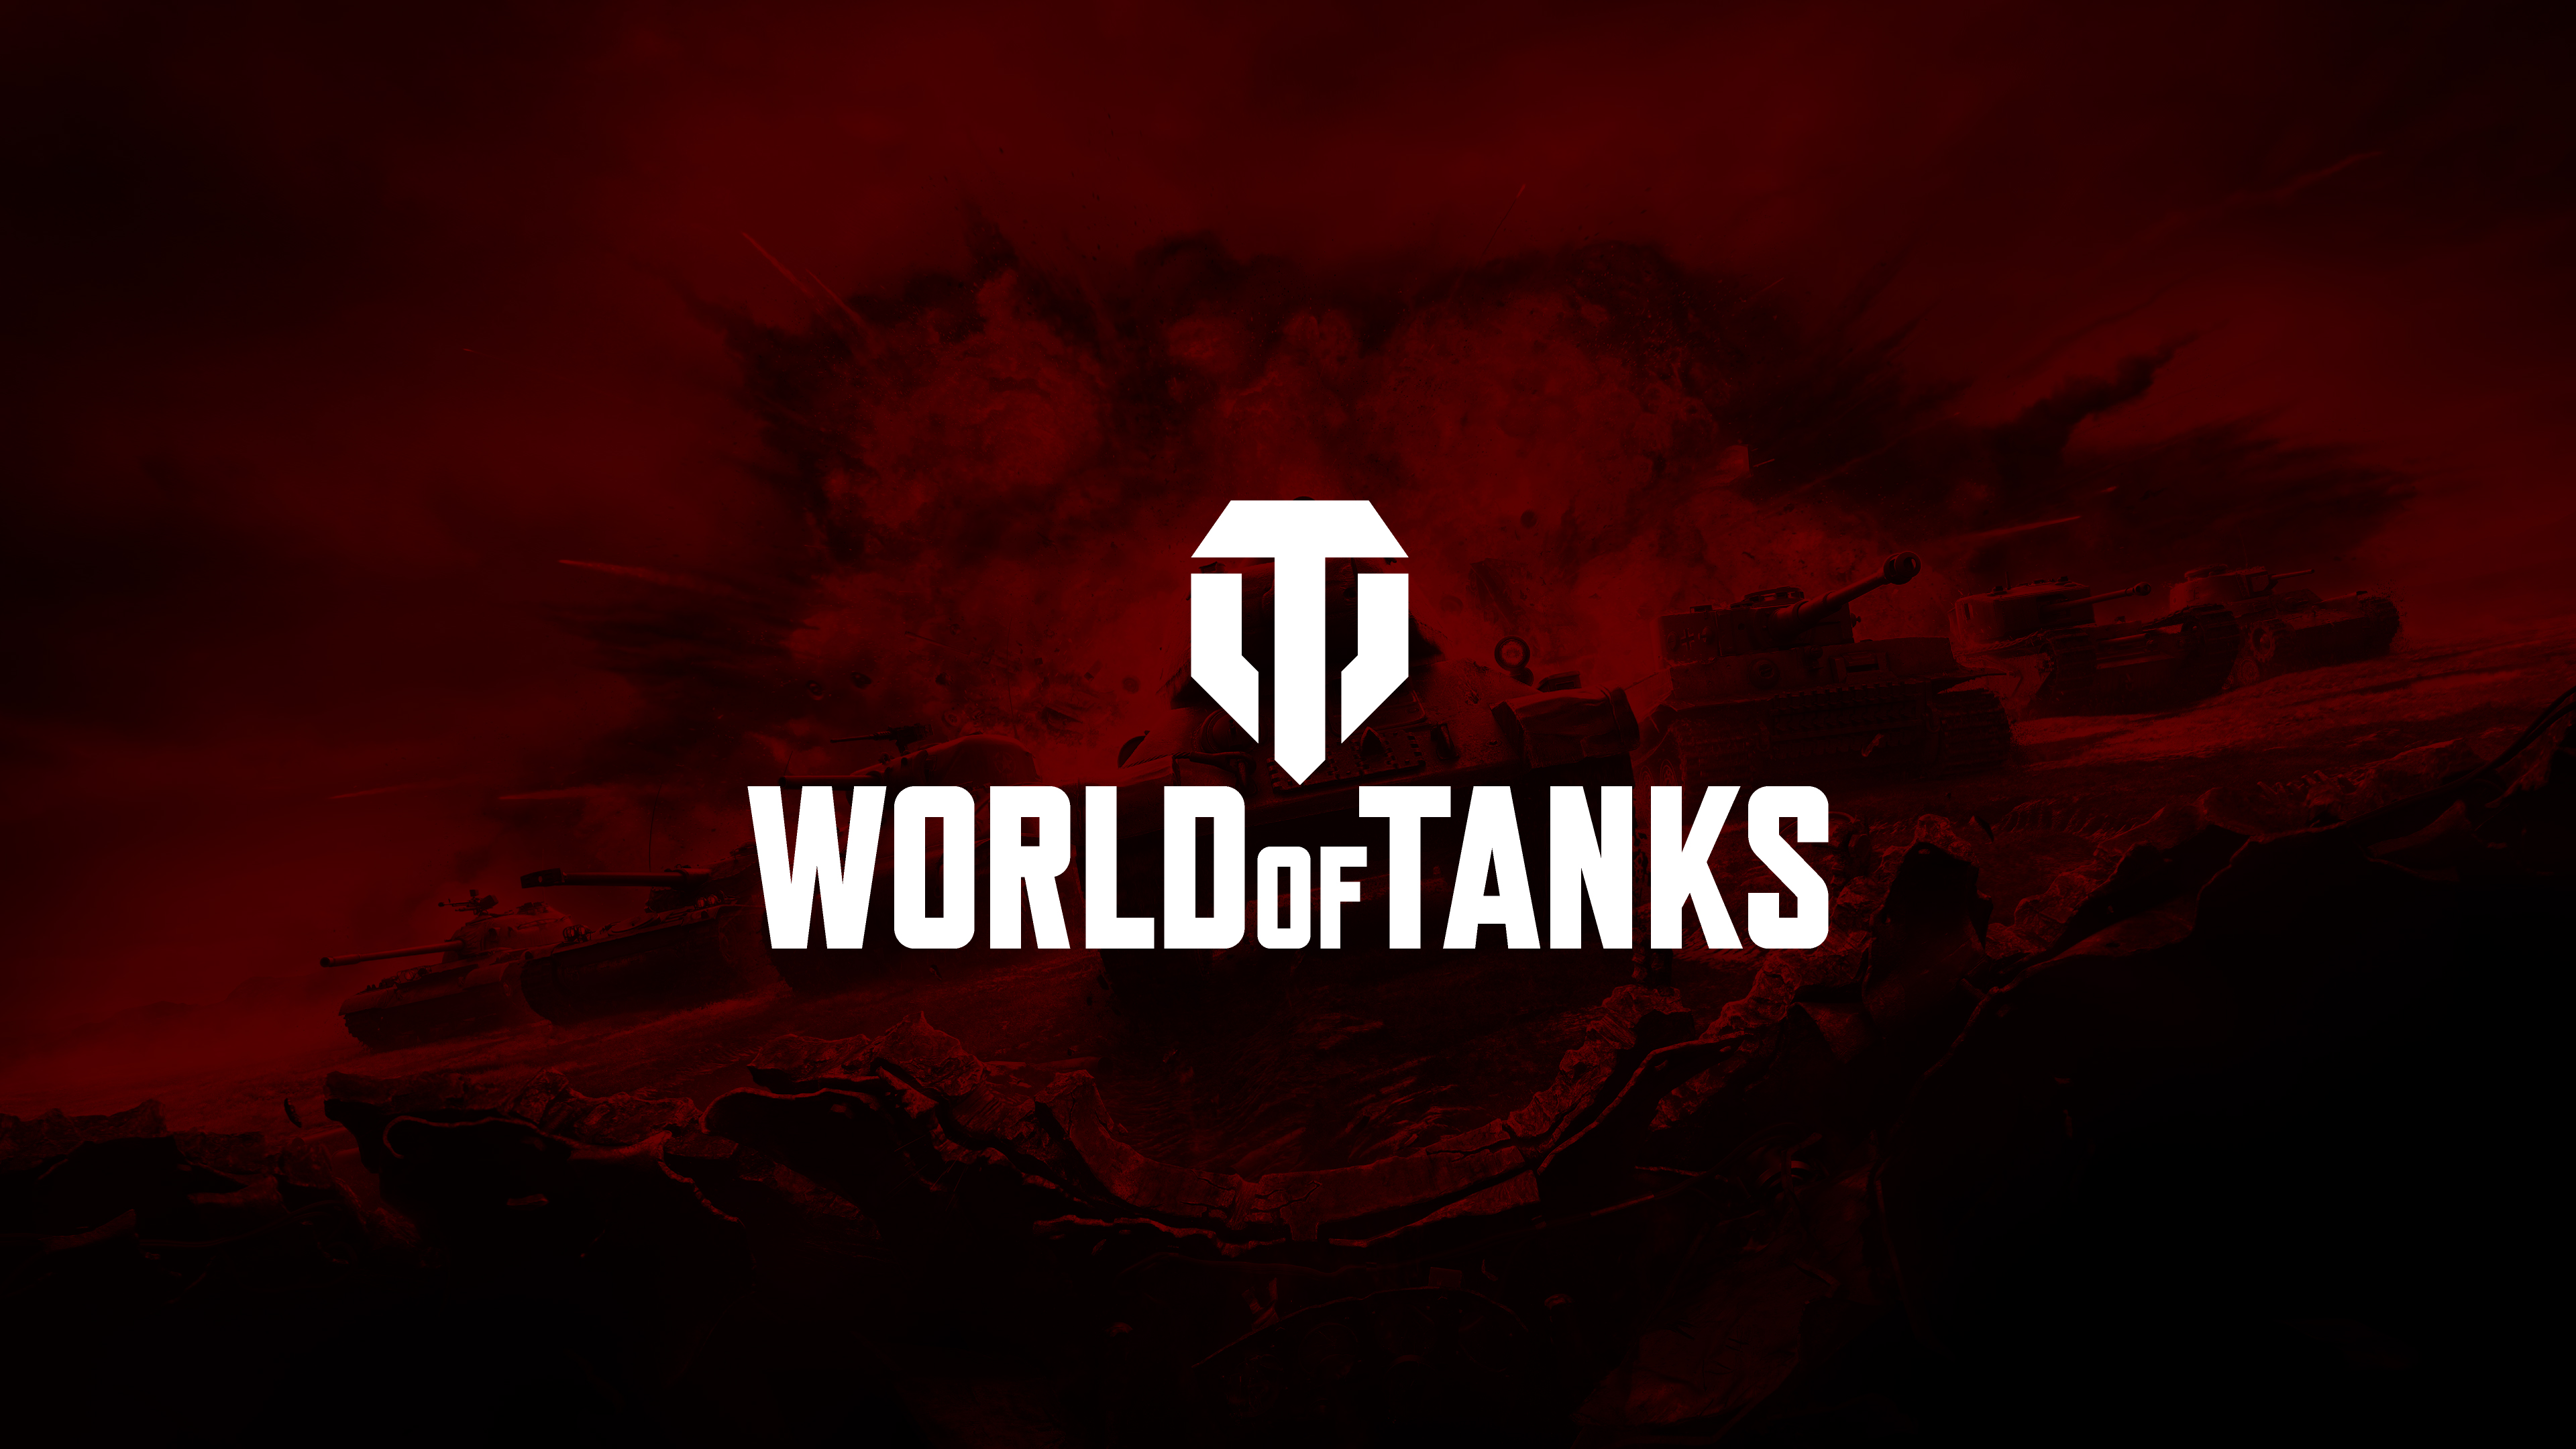 World of Tanks – Proposed Brand Refresh